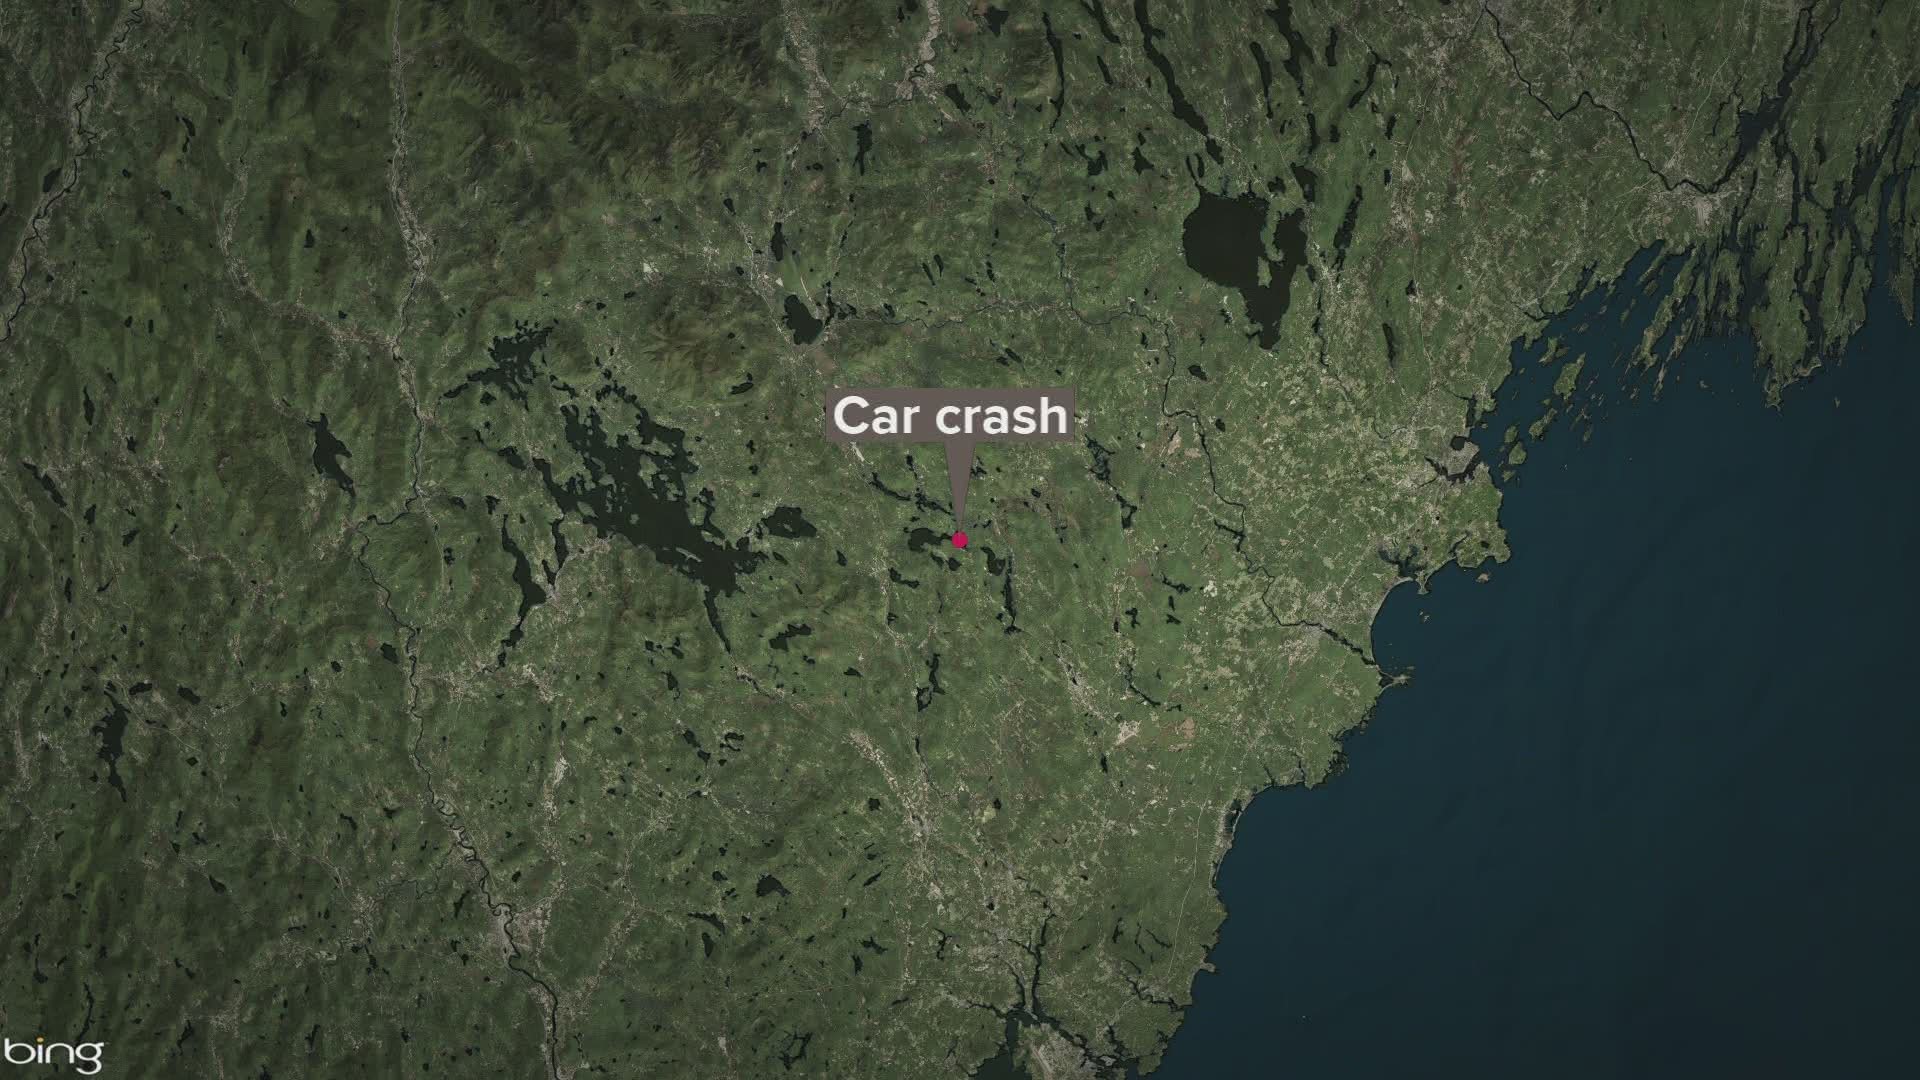 Police are investigating a late-night car crash in Acton that left a man dead and a woman in critical condition.